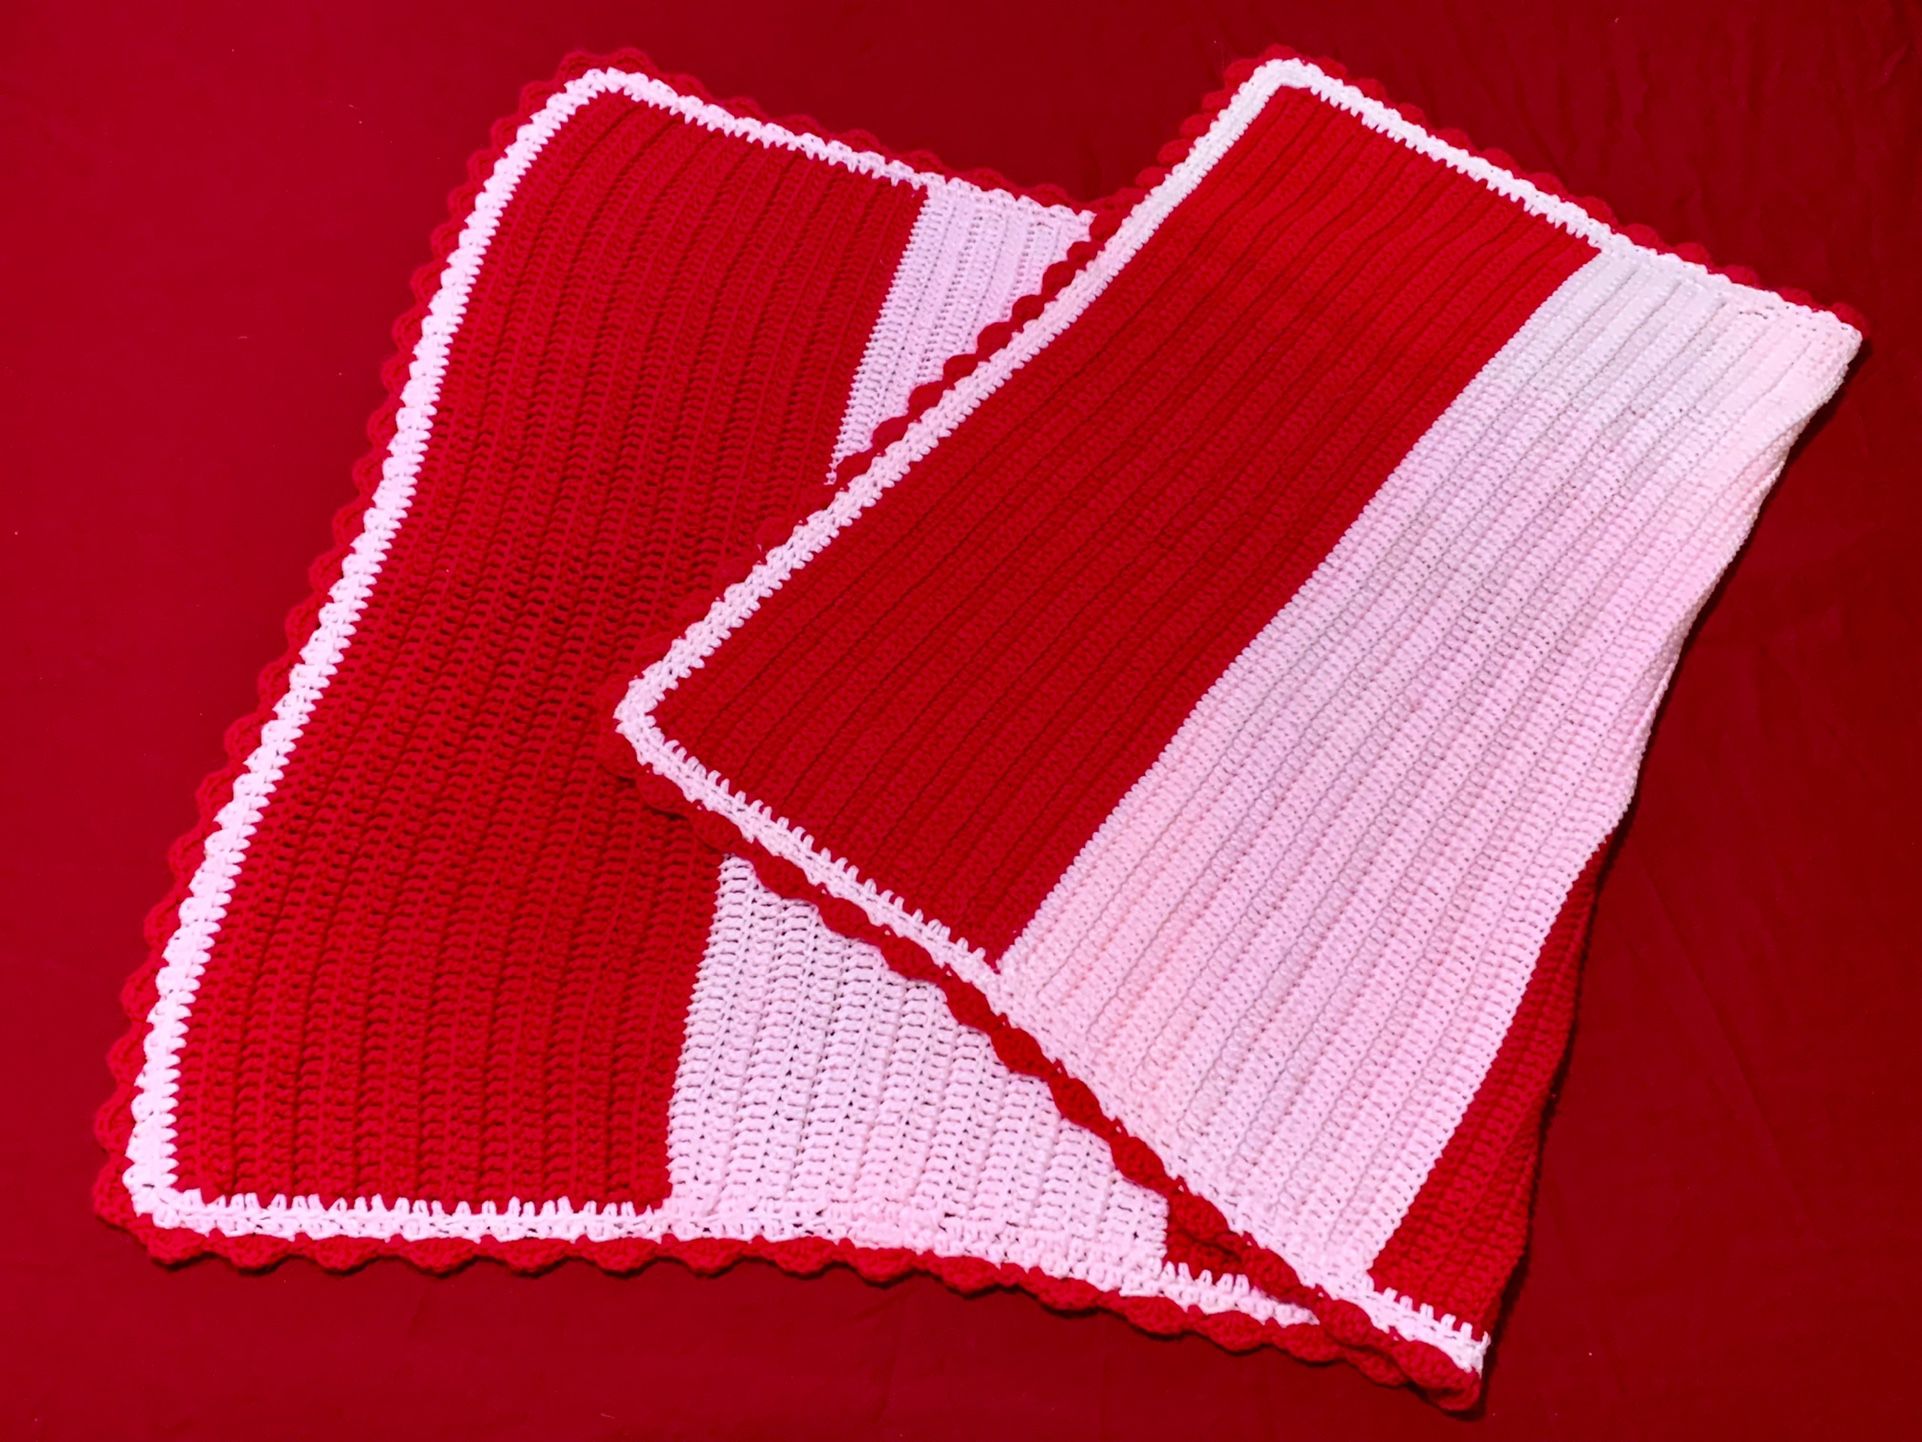 Hand Crocheted Red/Pinkish White Striped Afghan Throw Blanket 55”x 30” 